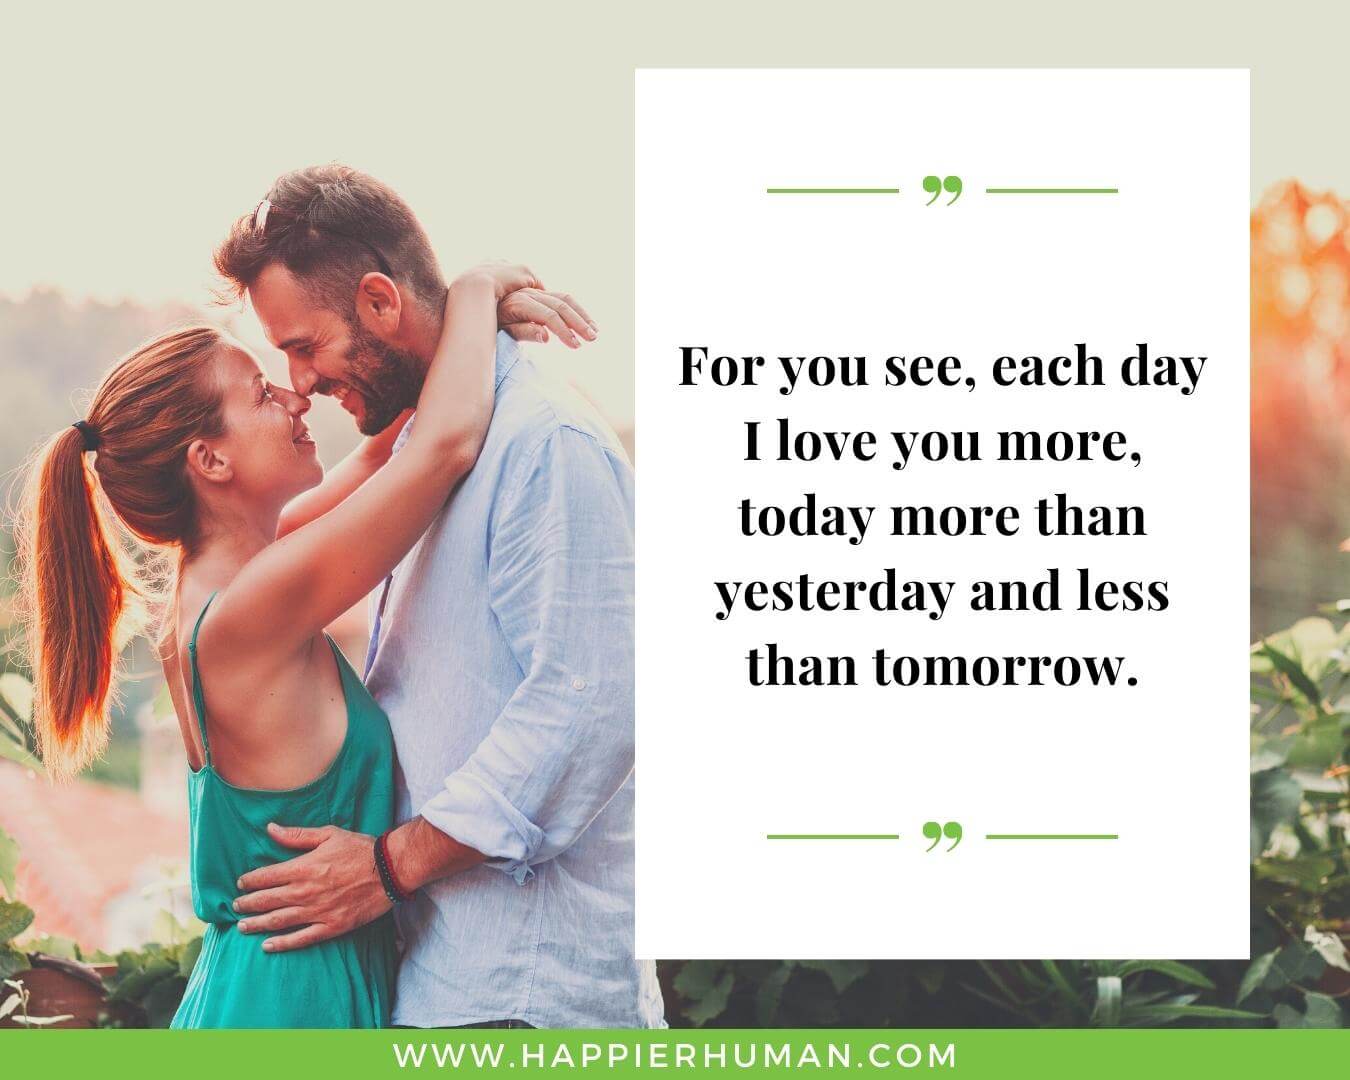 Finding True Love Quotes - “For you see, each day I love you more, today more than yesterday and less than tomorrow.”